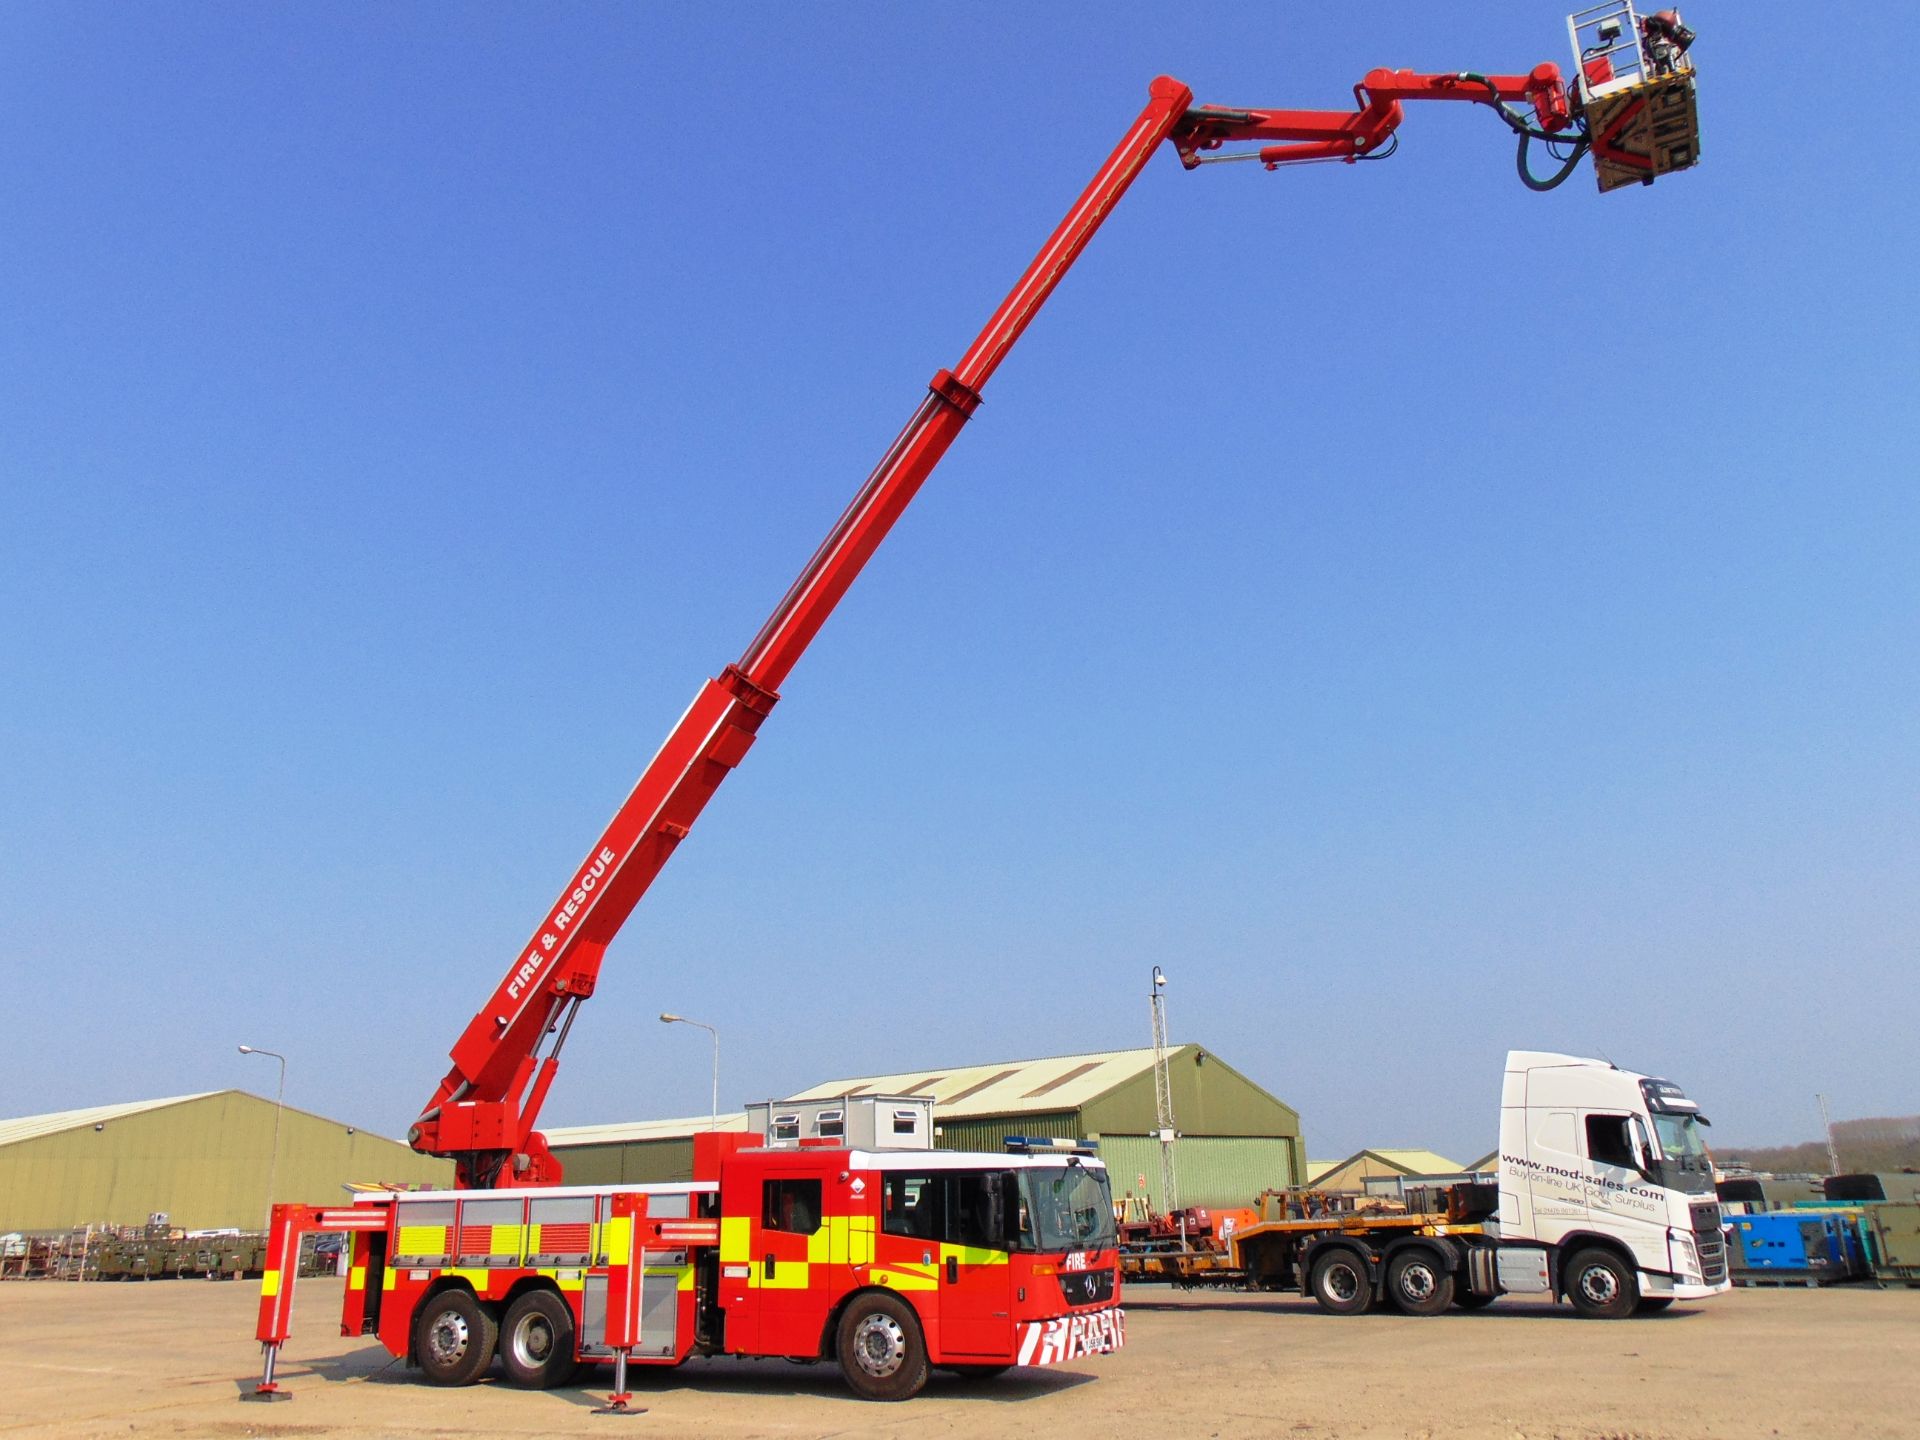 2008 Mercedes Econic CARP (Combined Aerial Rescue Pump) 6x2 Aerial Work Platform / Fire Appliance - Image 9 of 49